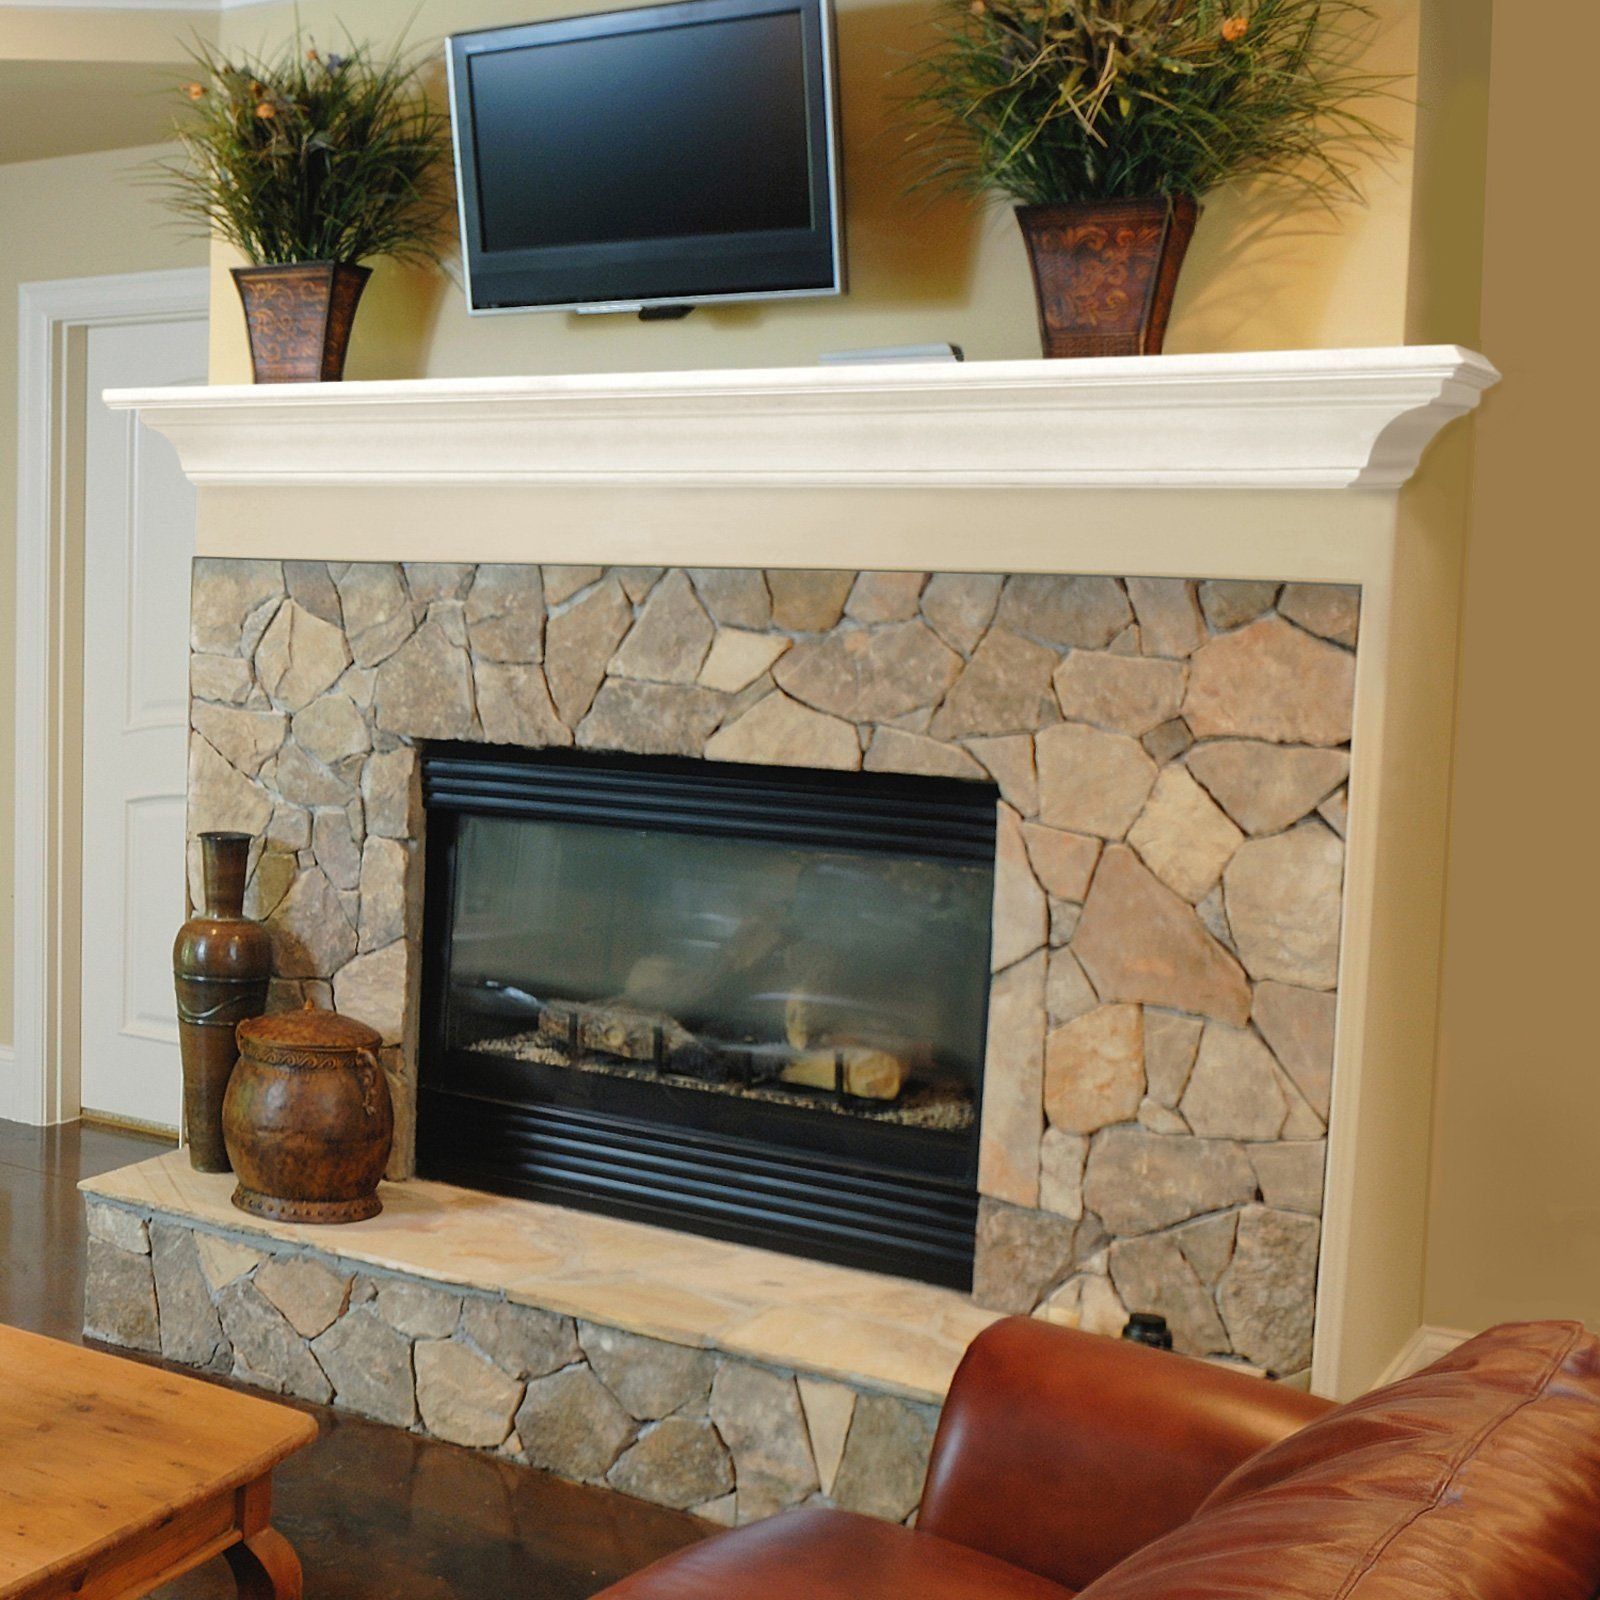 Fireplace Mantels with Hidden Storage Lovely Painted Wooden White Fireplace Mantel Shelf In 2019